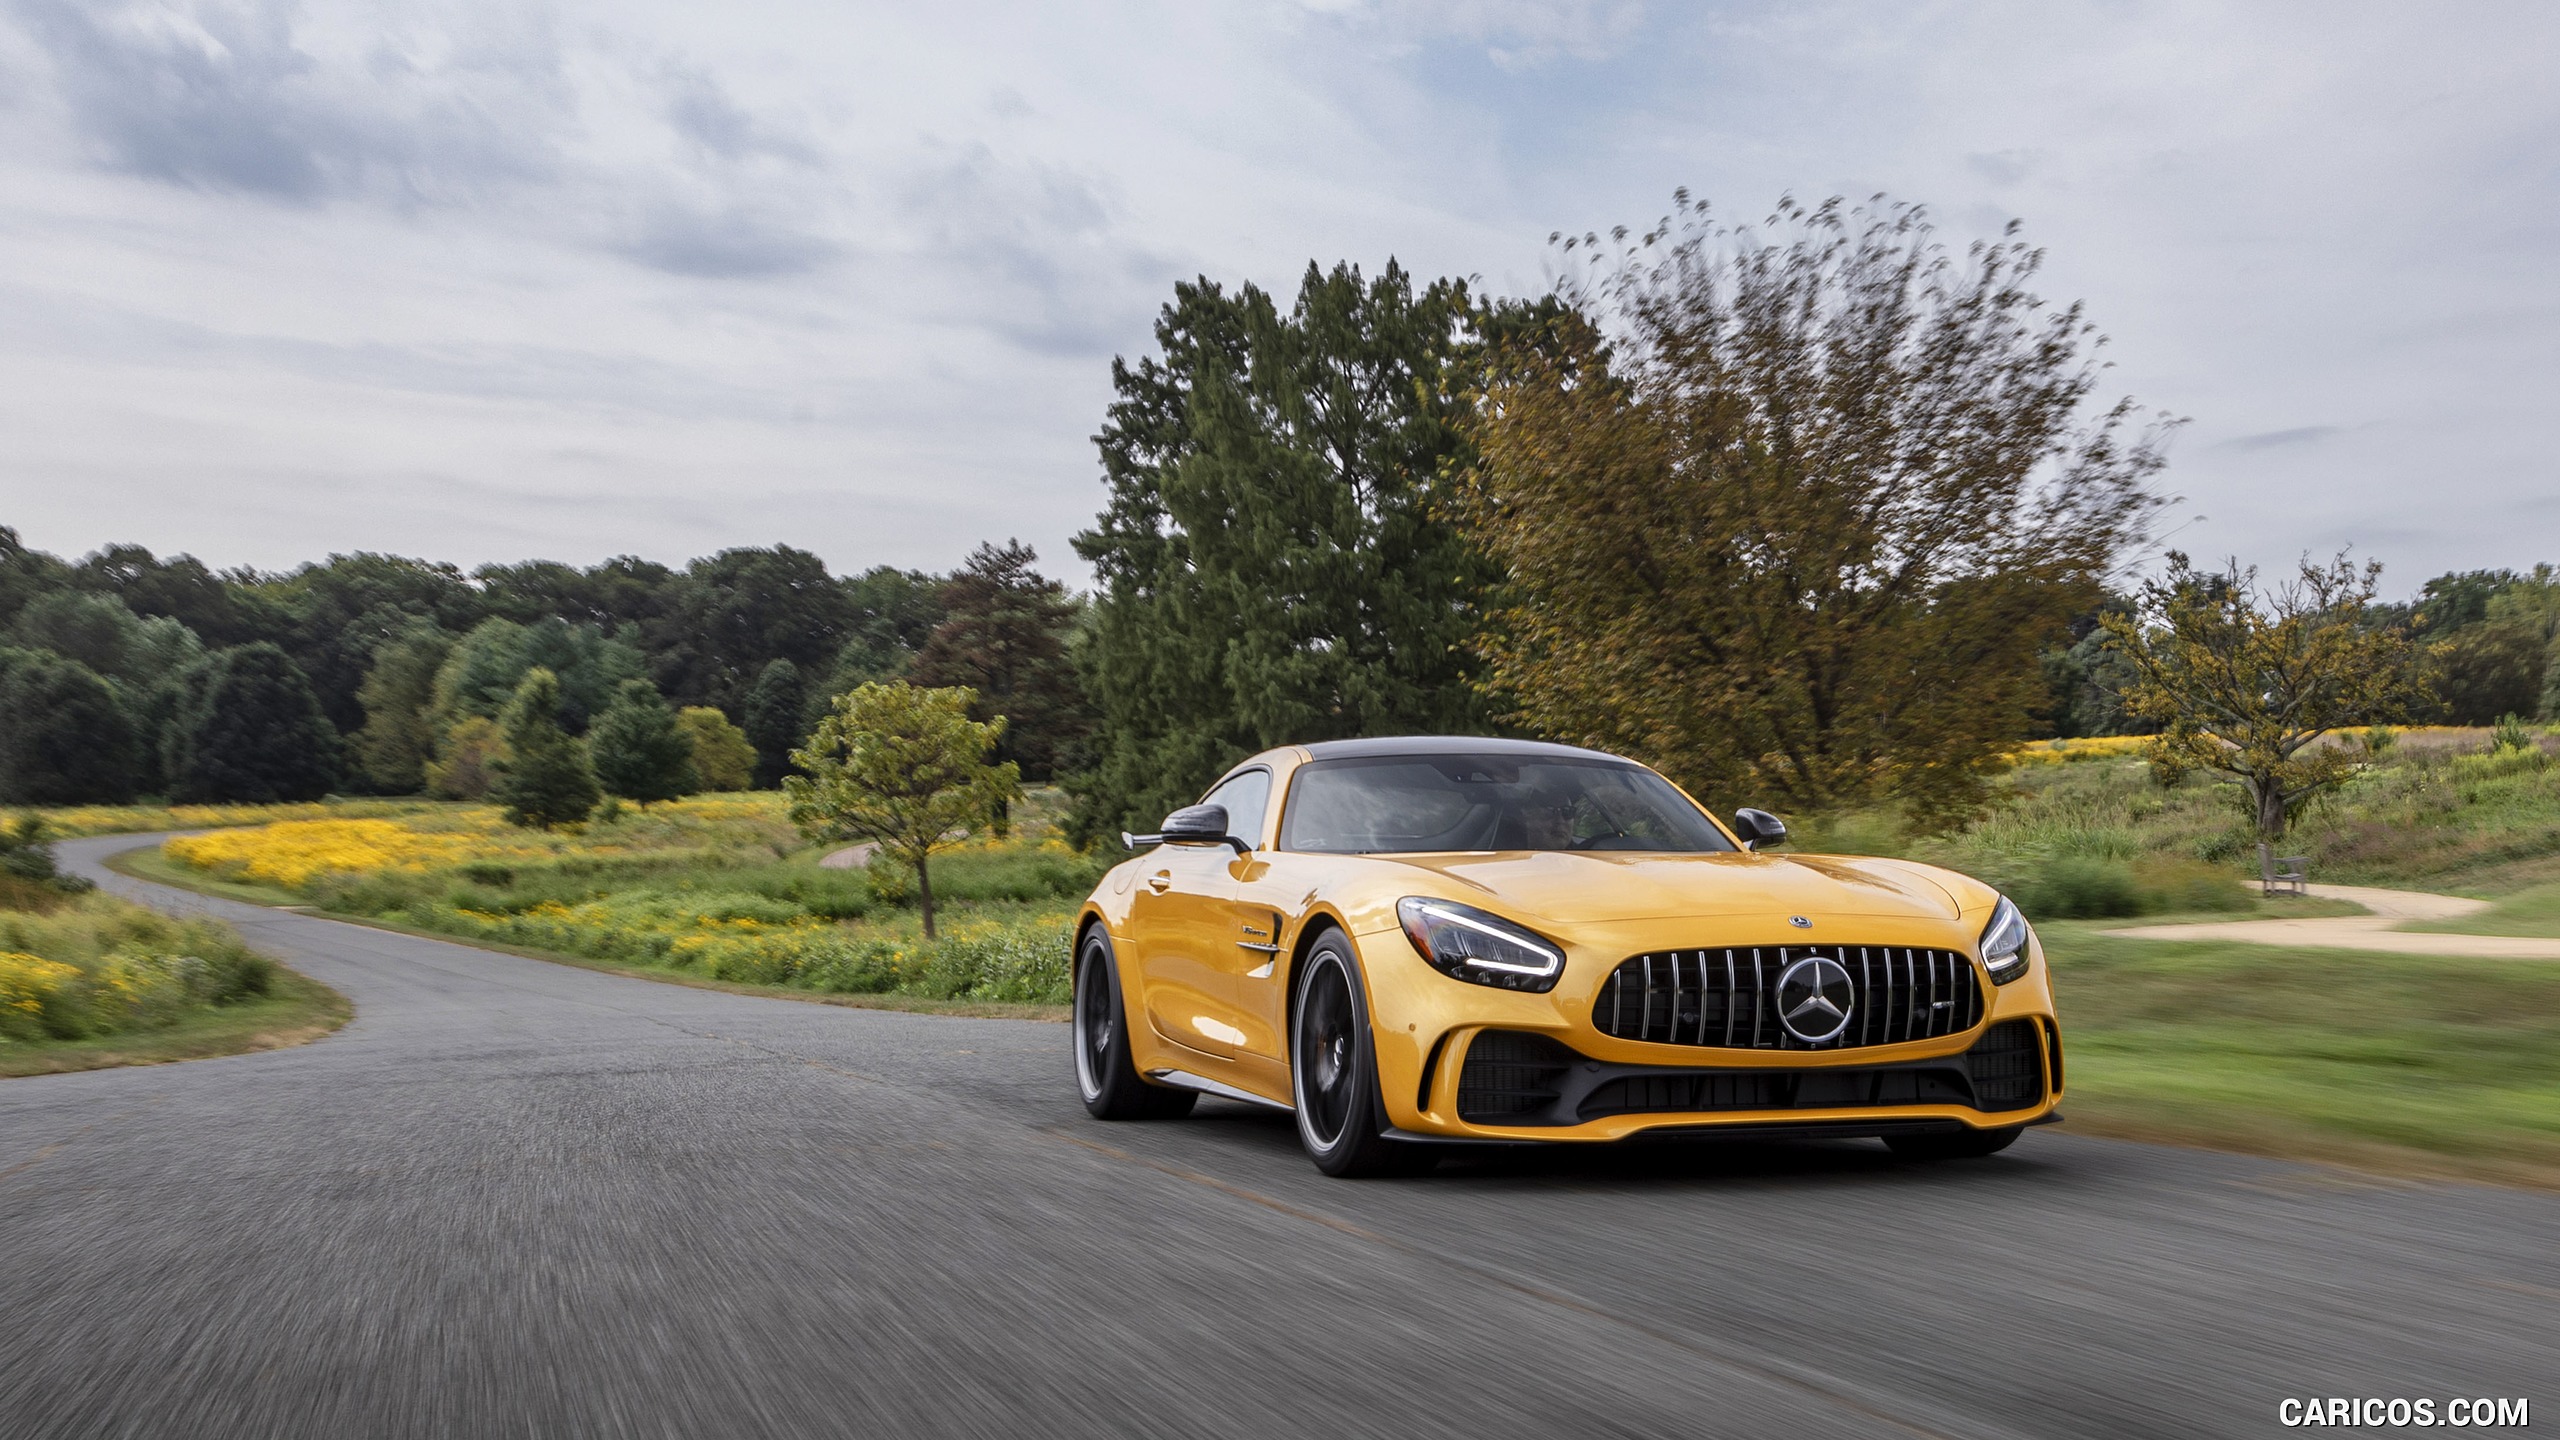 2020 Mercedes-AMG GT R Coupe (US-Spec) - Front Three-Quarter, #267 of 328